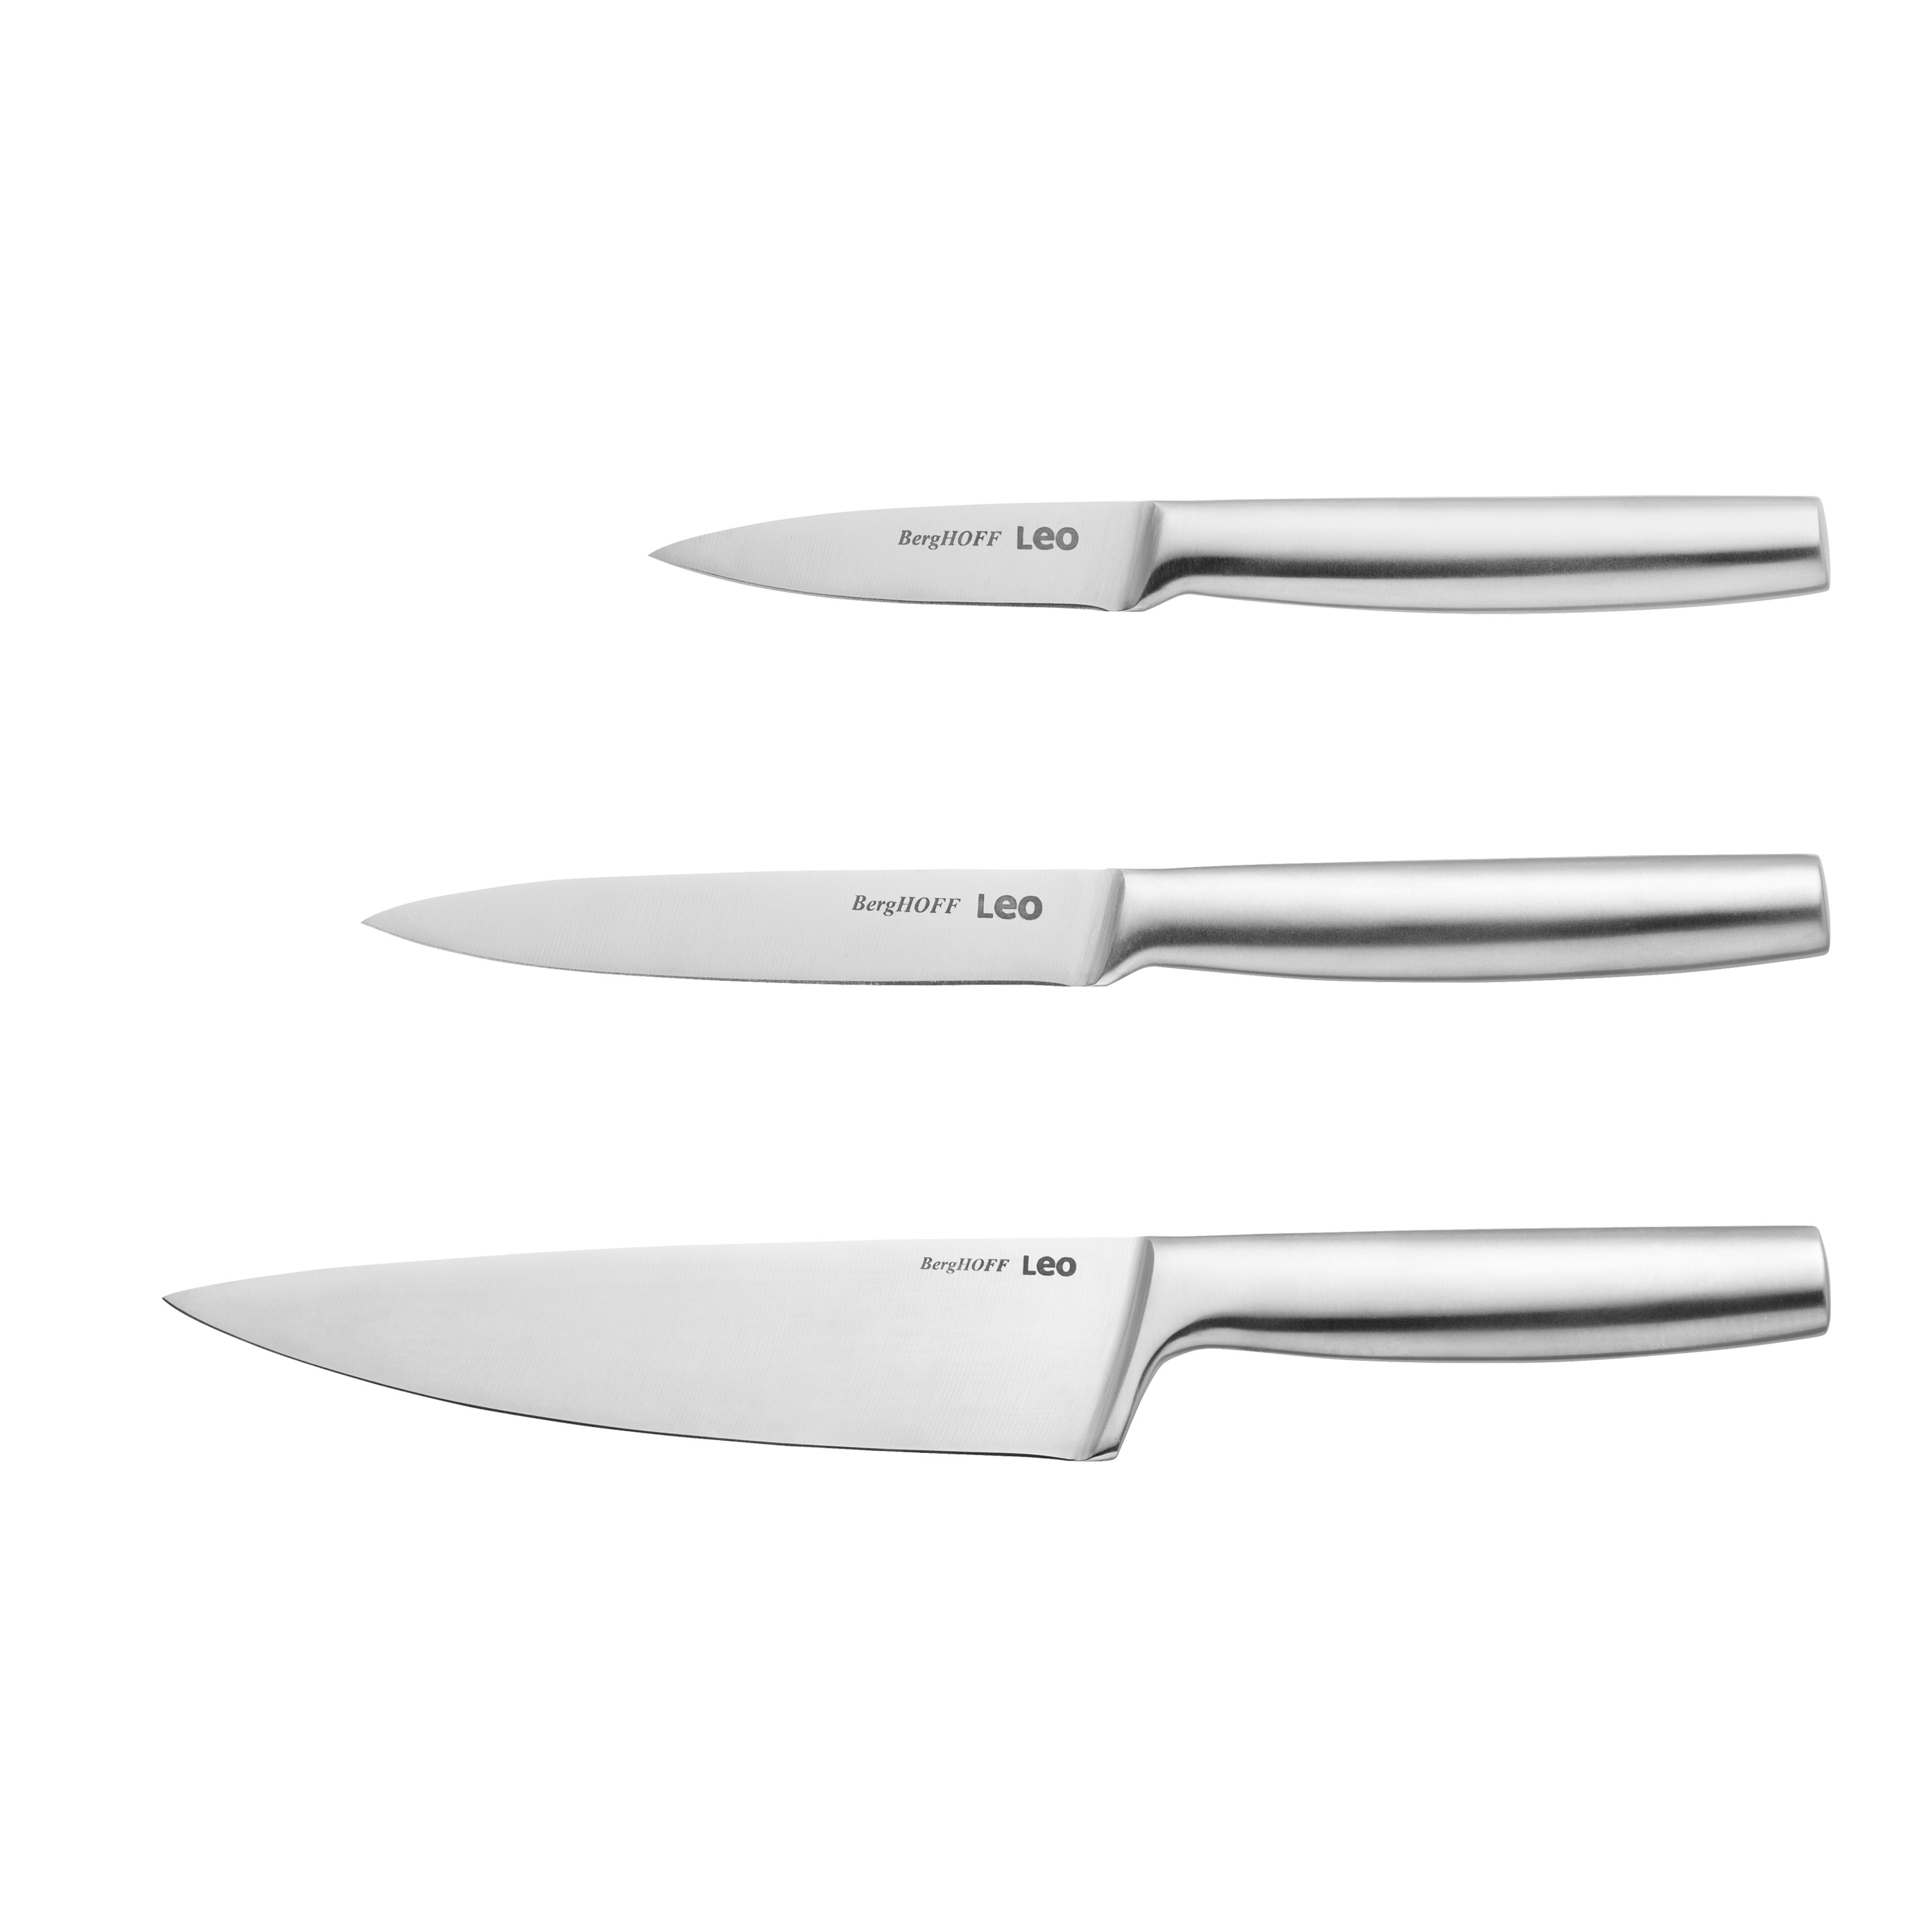 BergHOFF Leo Stainless Steel Knife Set with Block - Gray, 6 pc